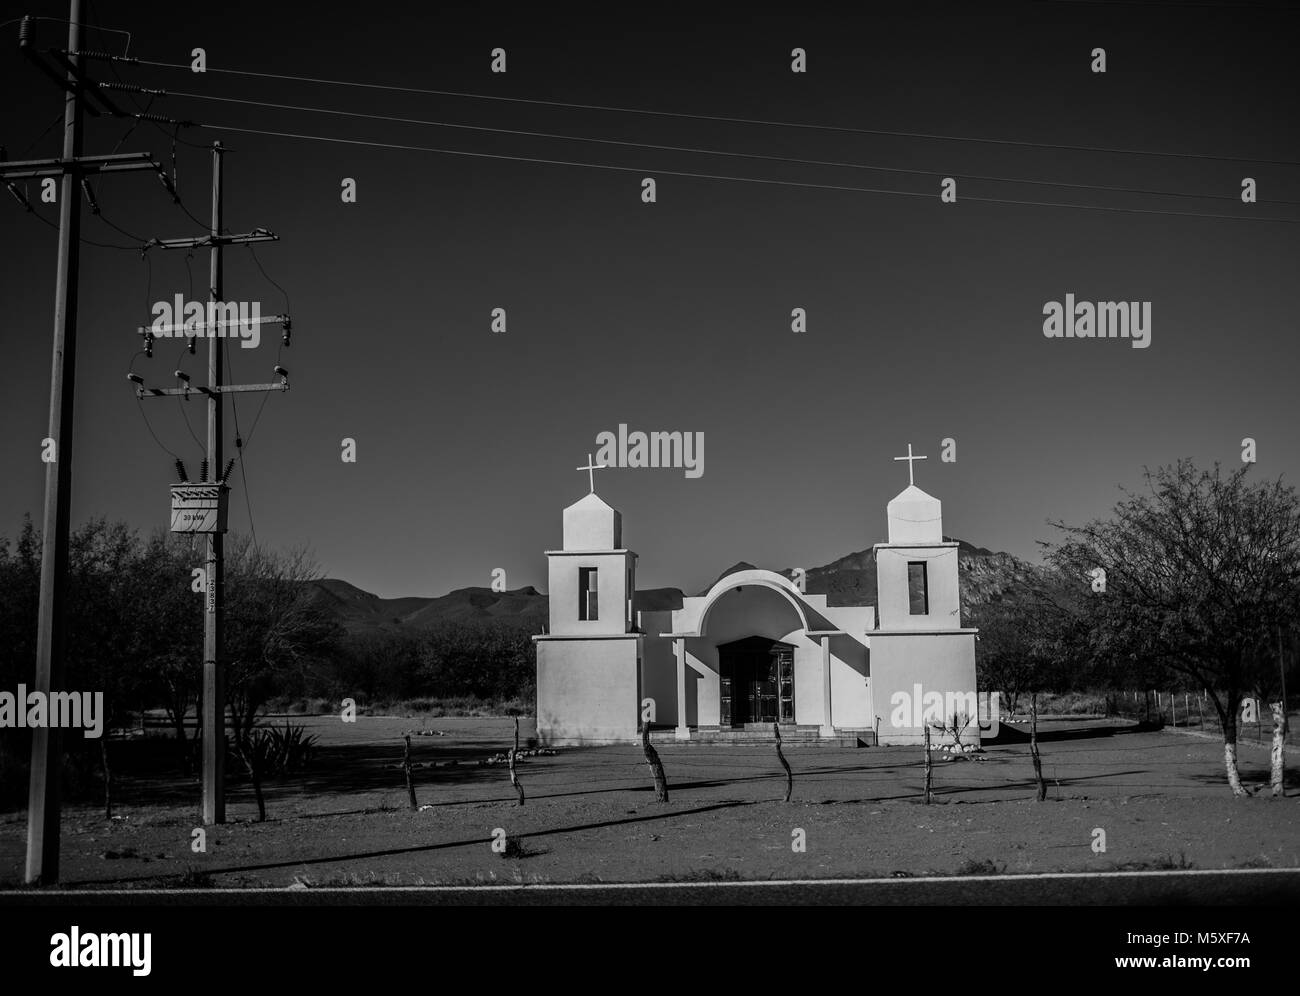 White church El Valle village, in the community of Cumpas and los Hoyos. The place is part of the Sierra route in Sonora, Mexico. fence, siege, prongs Stock Photo